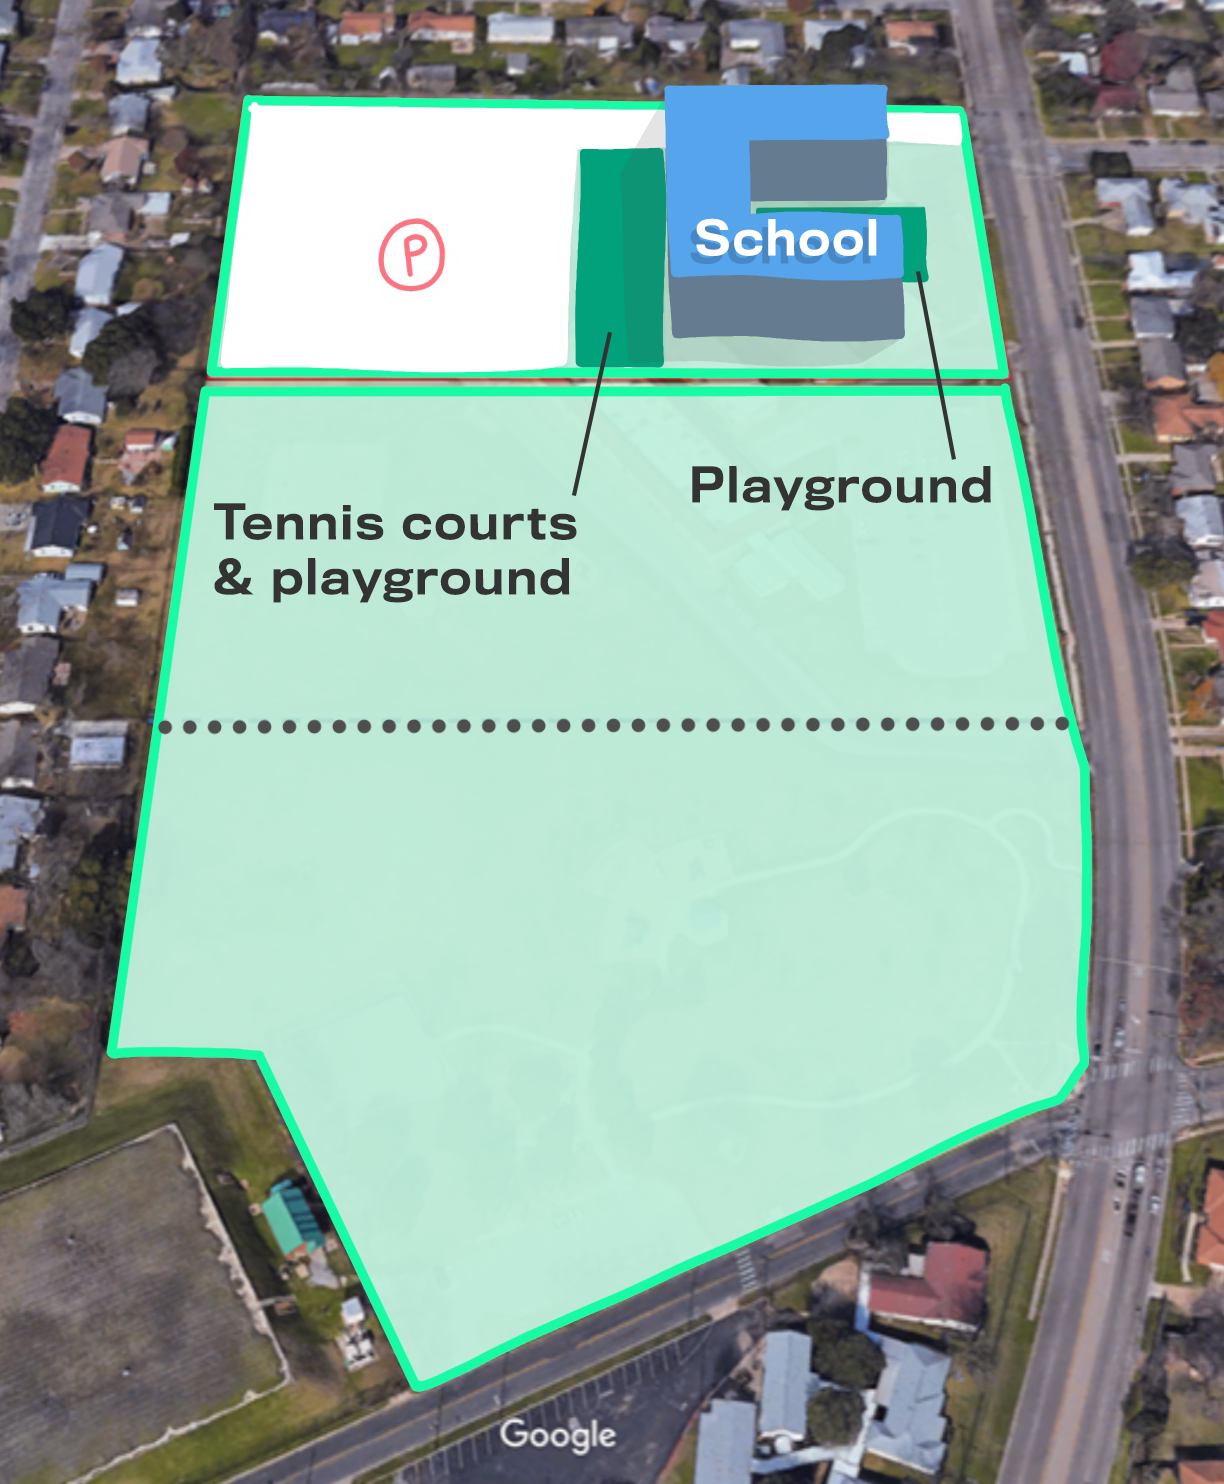 An alternative option for combining park and public school grounds, with a much smaller footprint